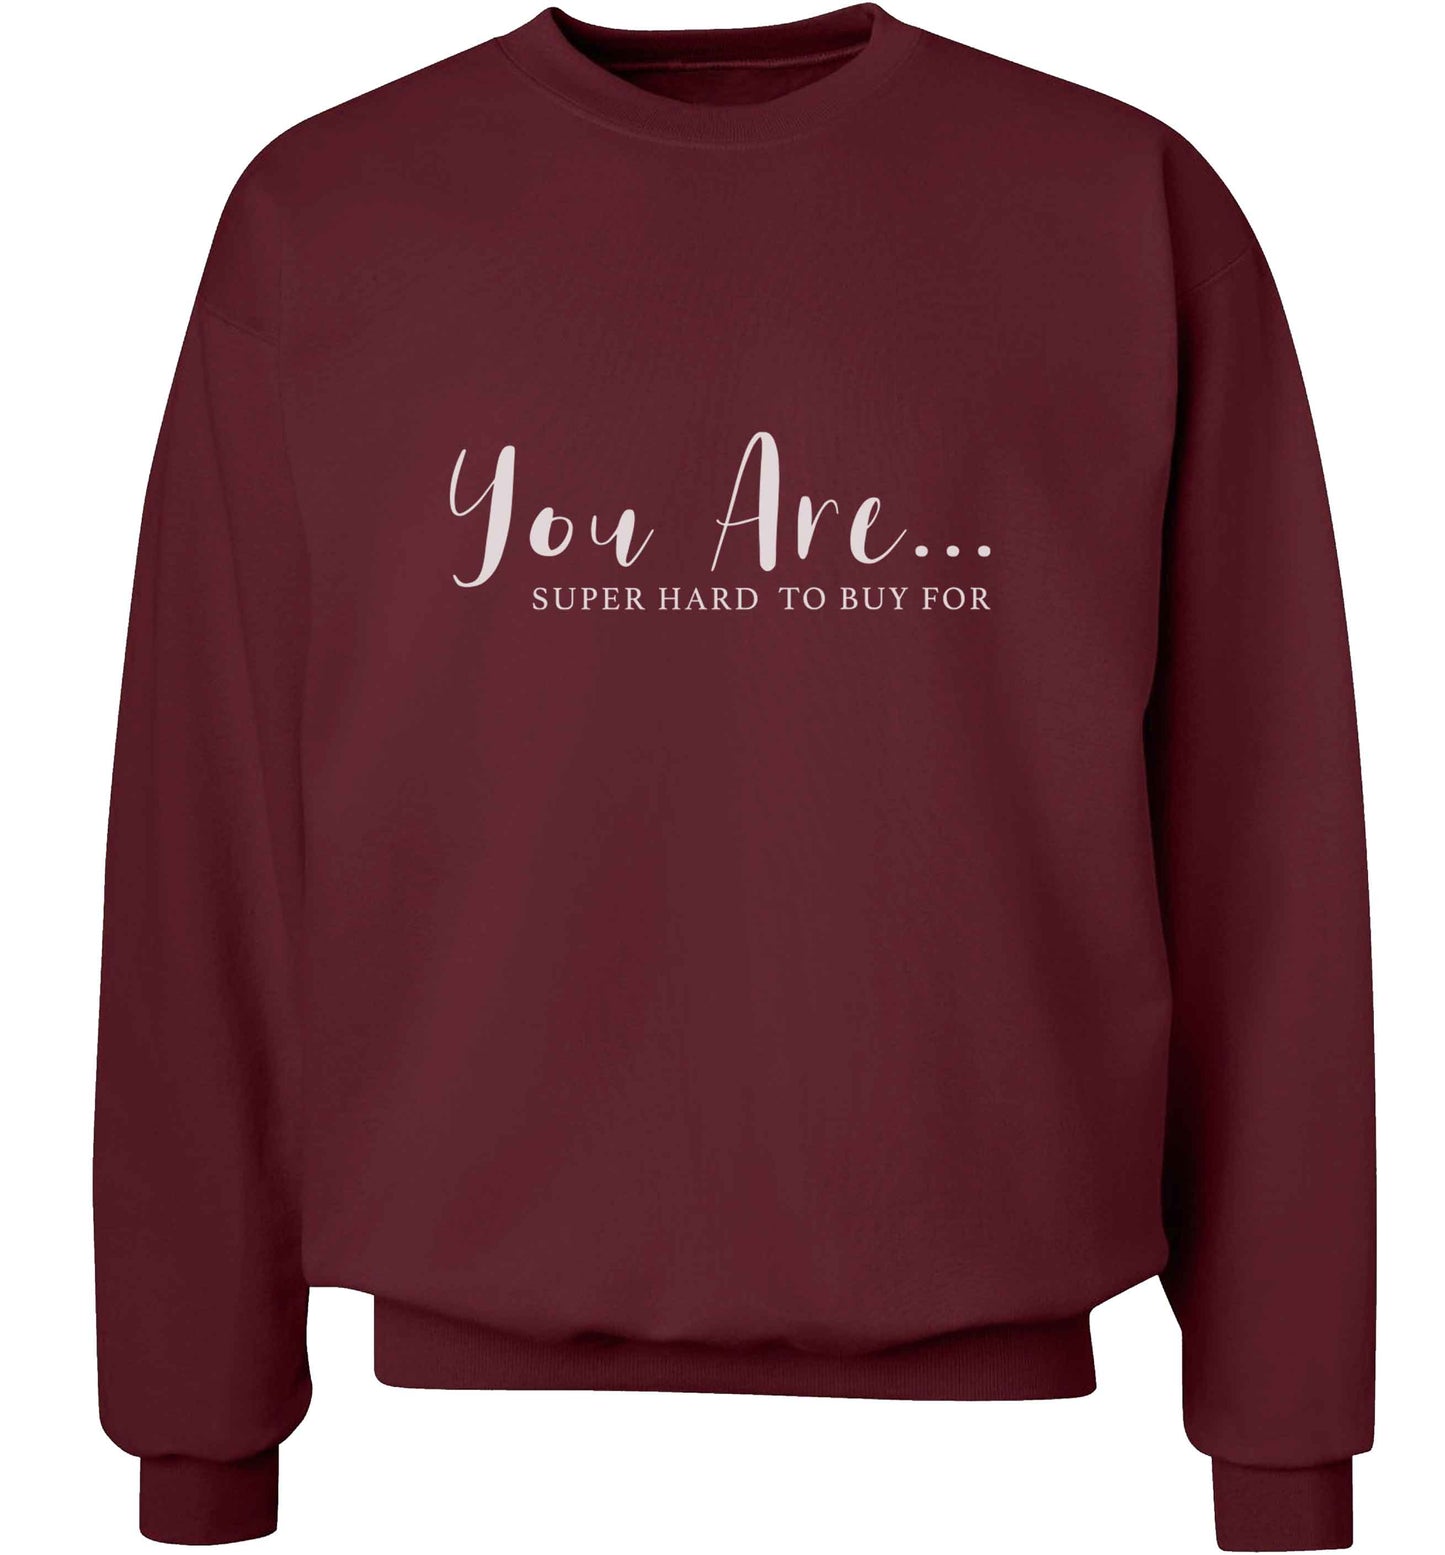 You are super hard to buy for adult's unisex maroon sweater 2XL